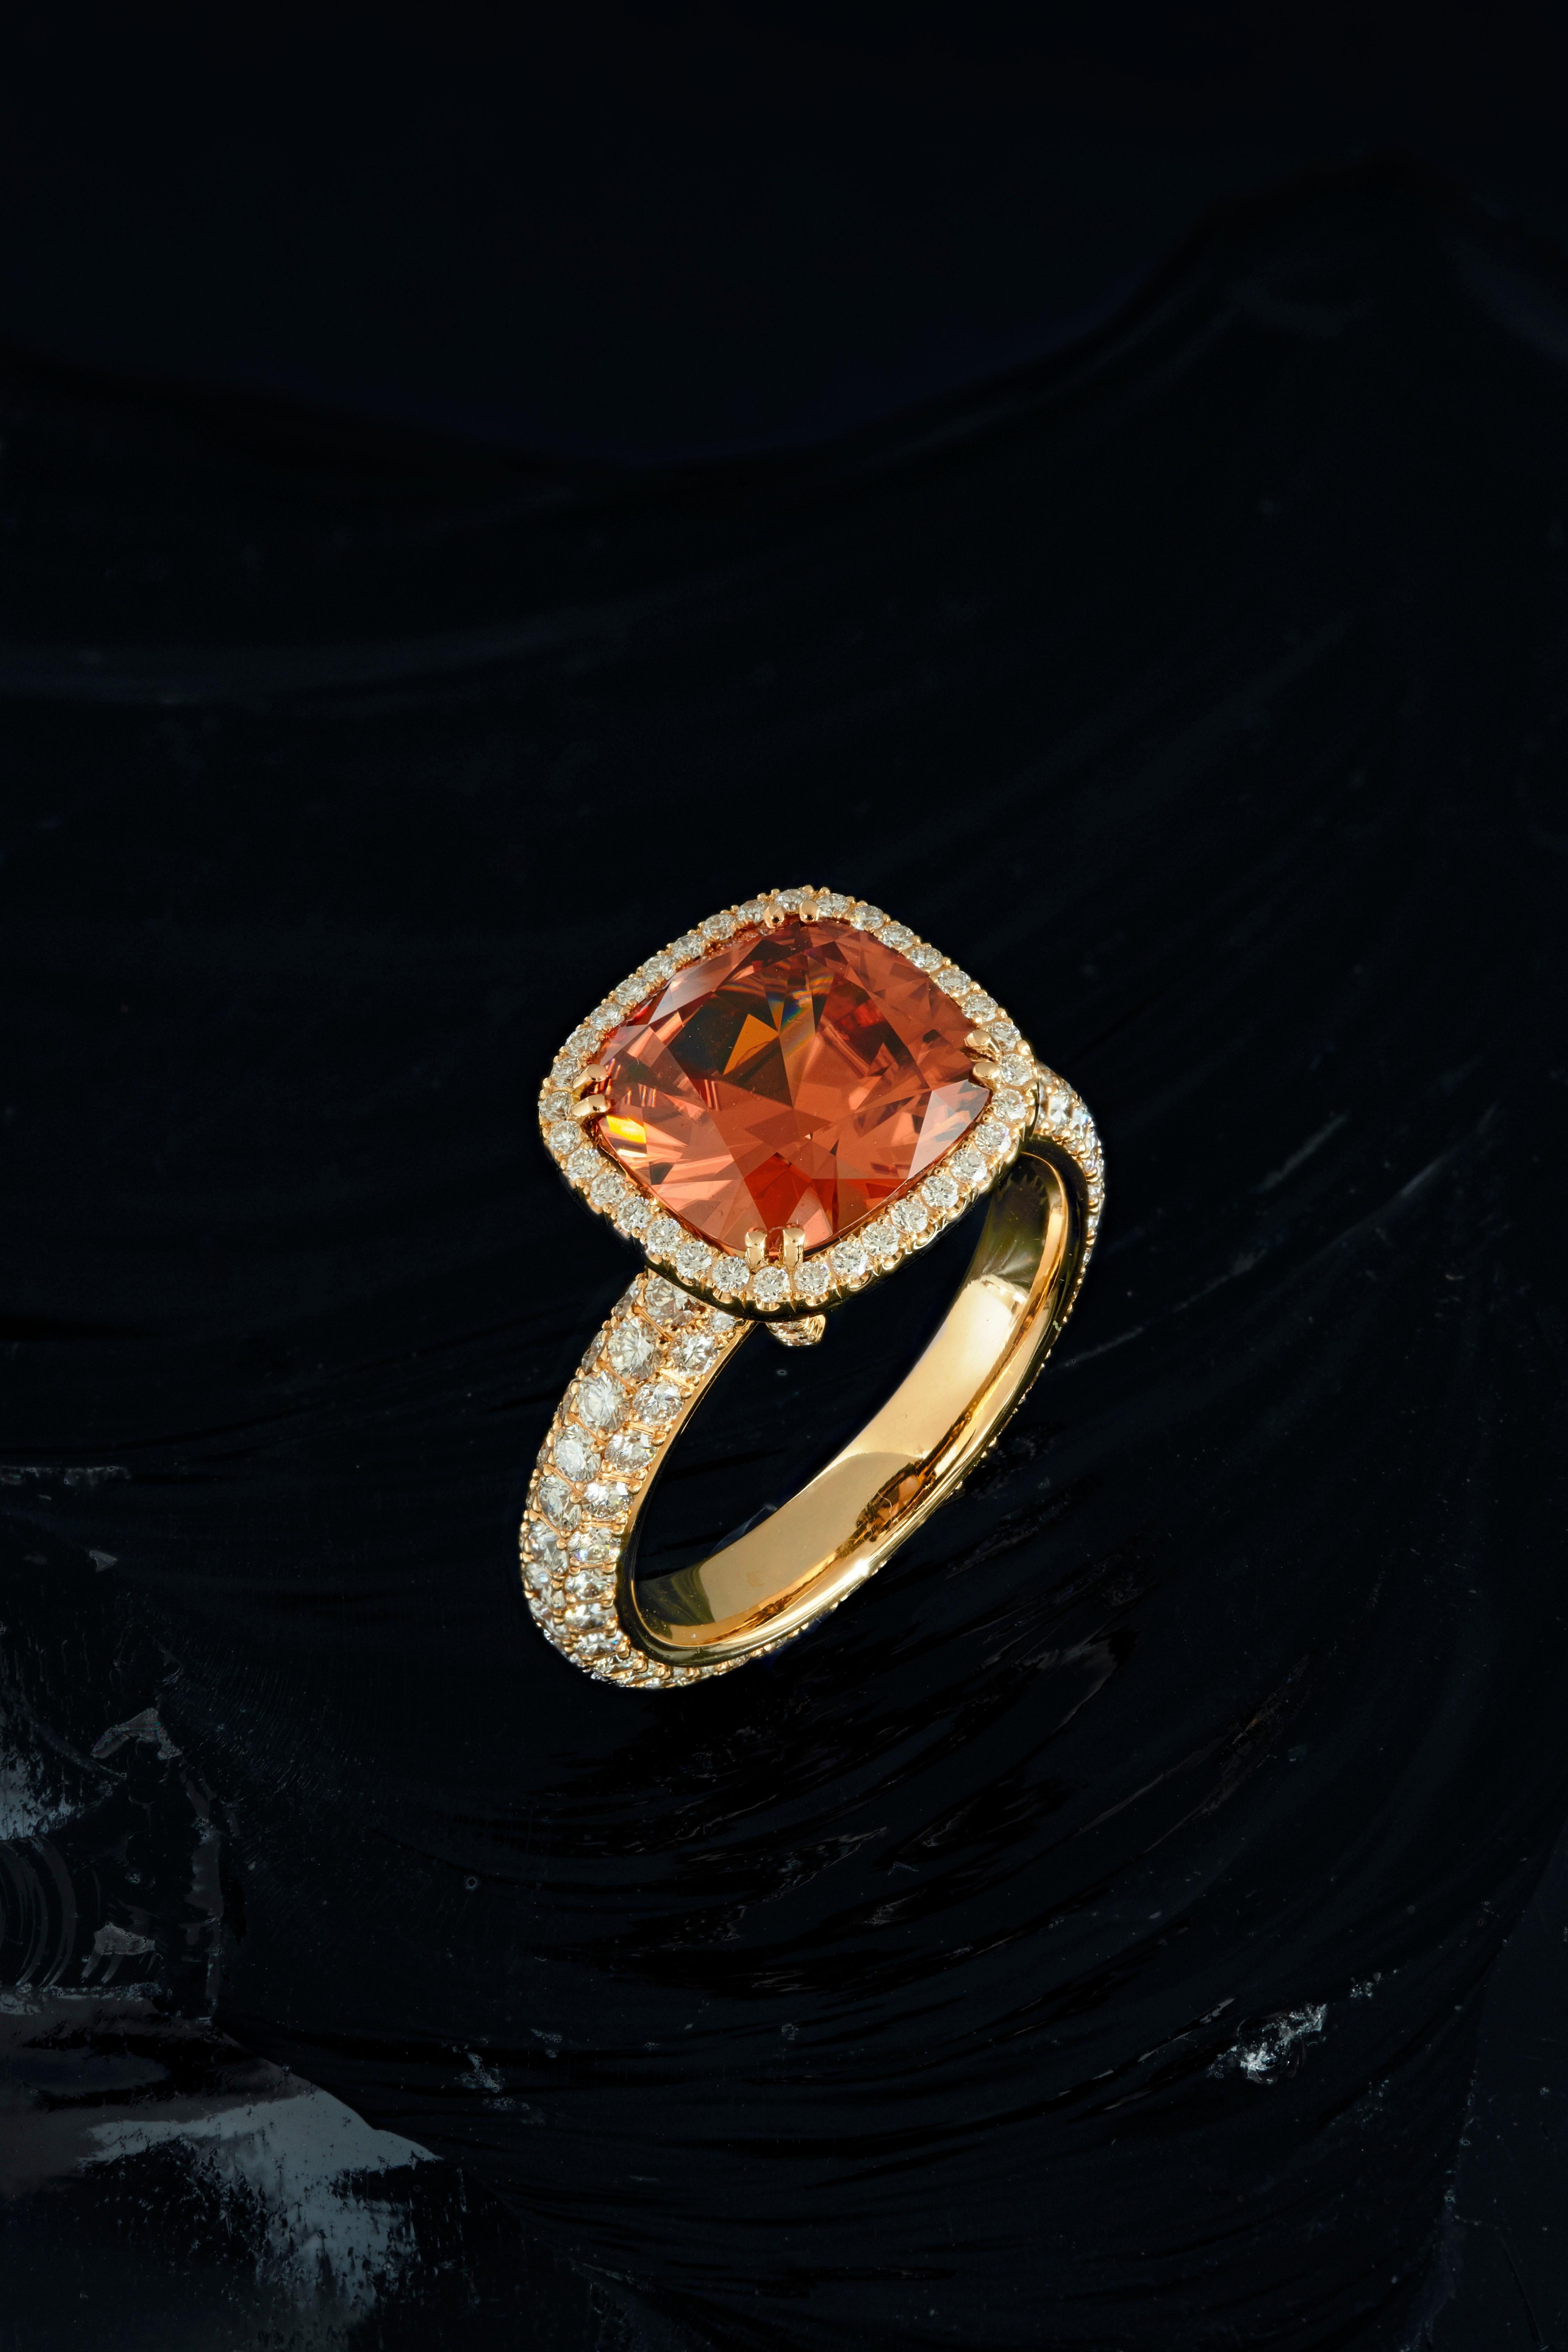 This one-off ring is handmade in Switzerland with a cushion cut Malayan Zircon of 4.97 ct. in entourage of Diamonds of total 1.78 ct. F vvs. It is made in 18K rose gold.
You can expect the best Swiss workmanship and quality.
ring size 55